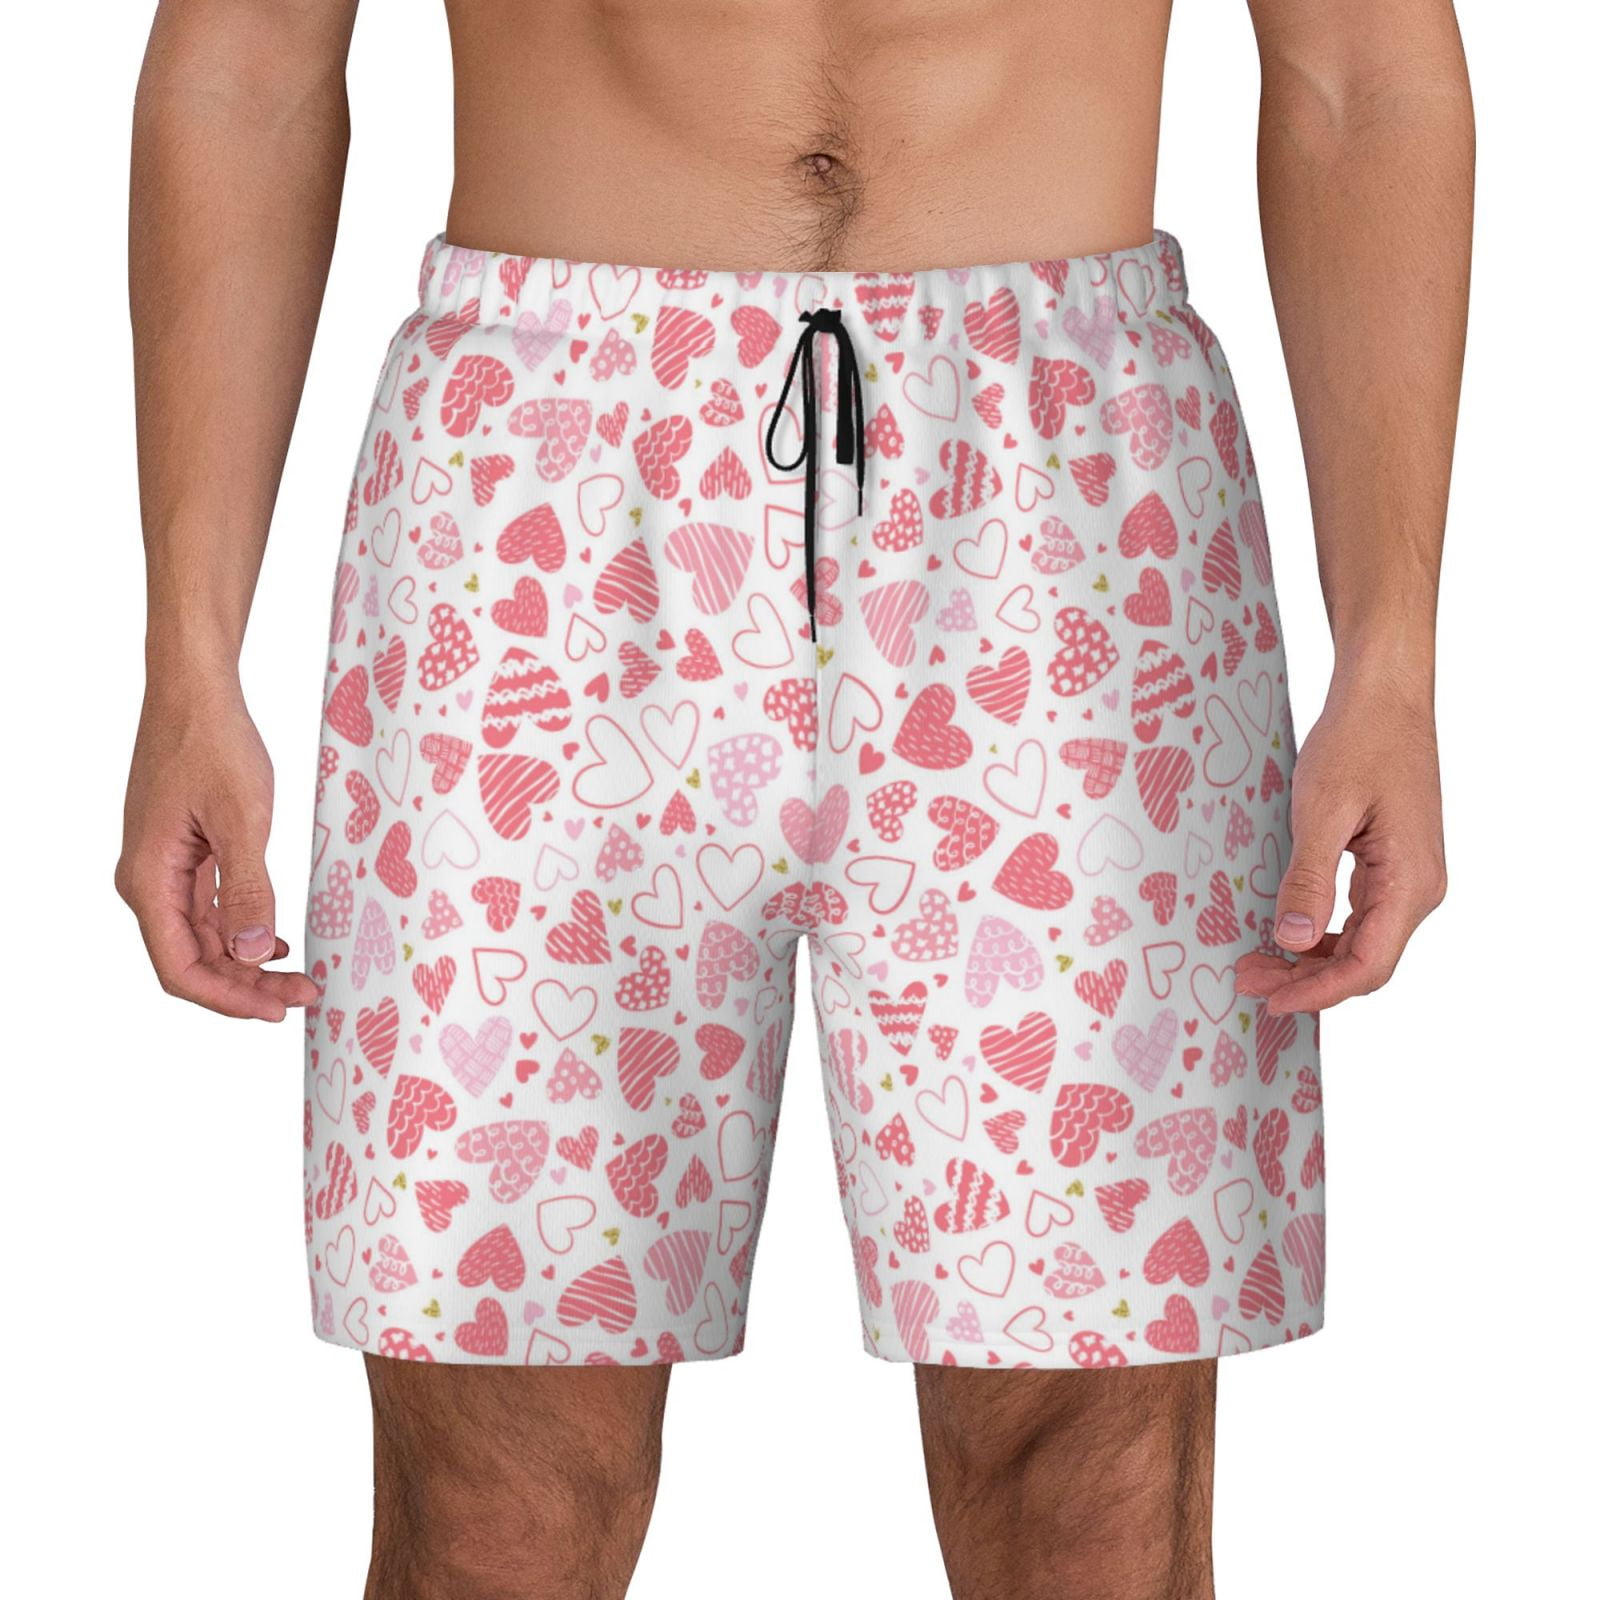 Haiem Cute Hand Drawn Hearts Mens Swim Trunks with Compression Liner 2 in 1 Swimming Shorts ...